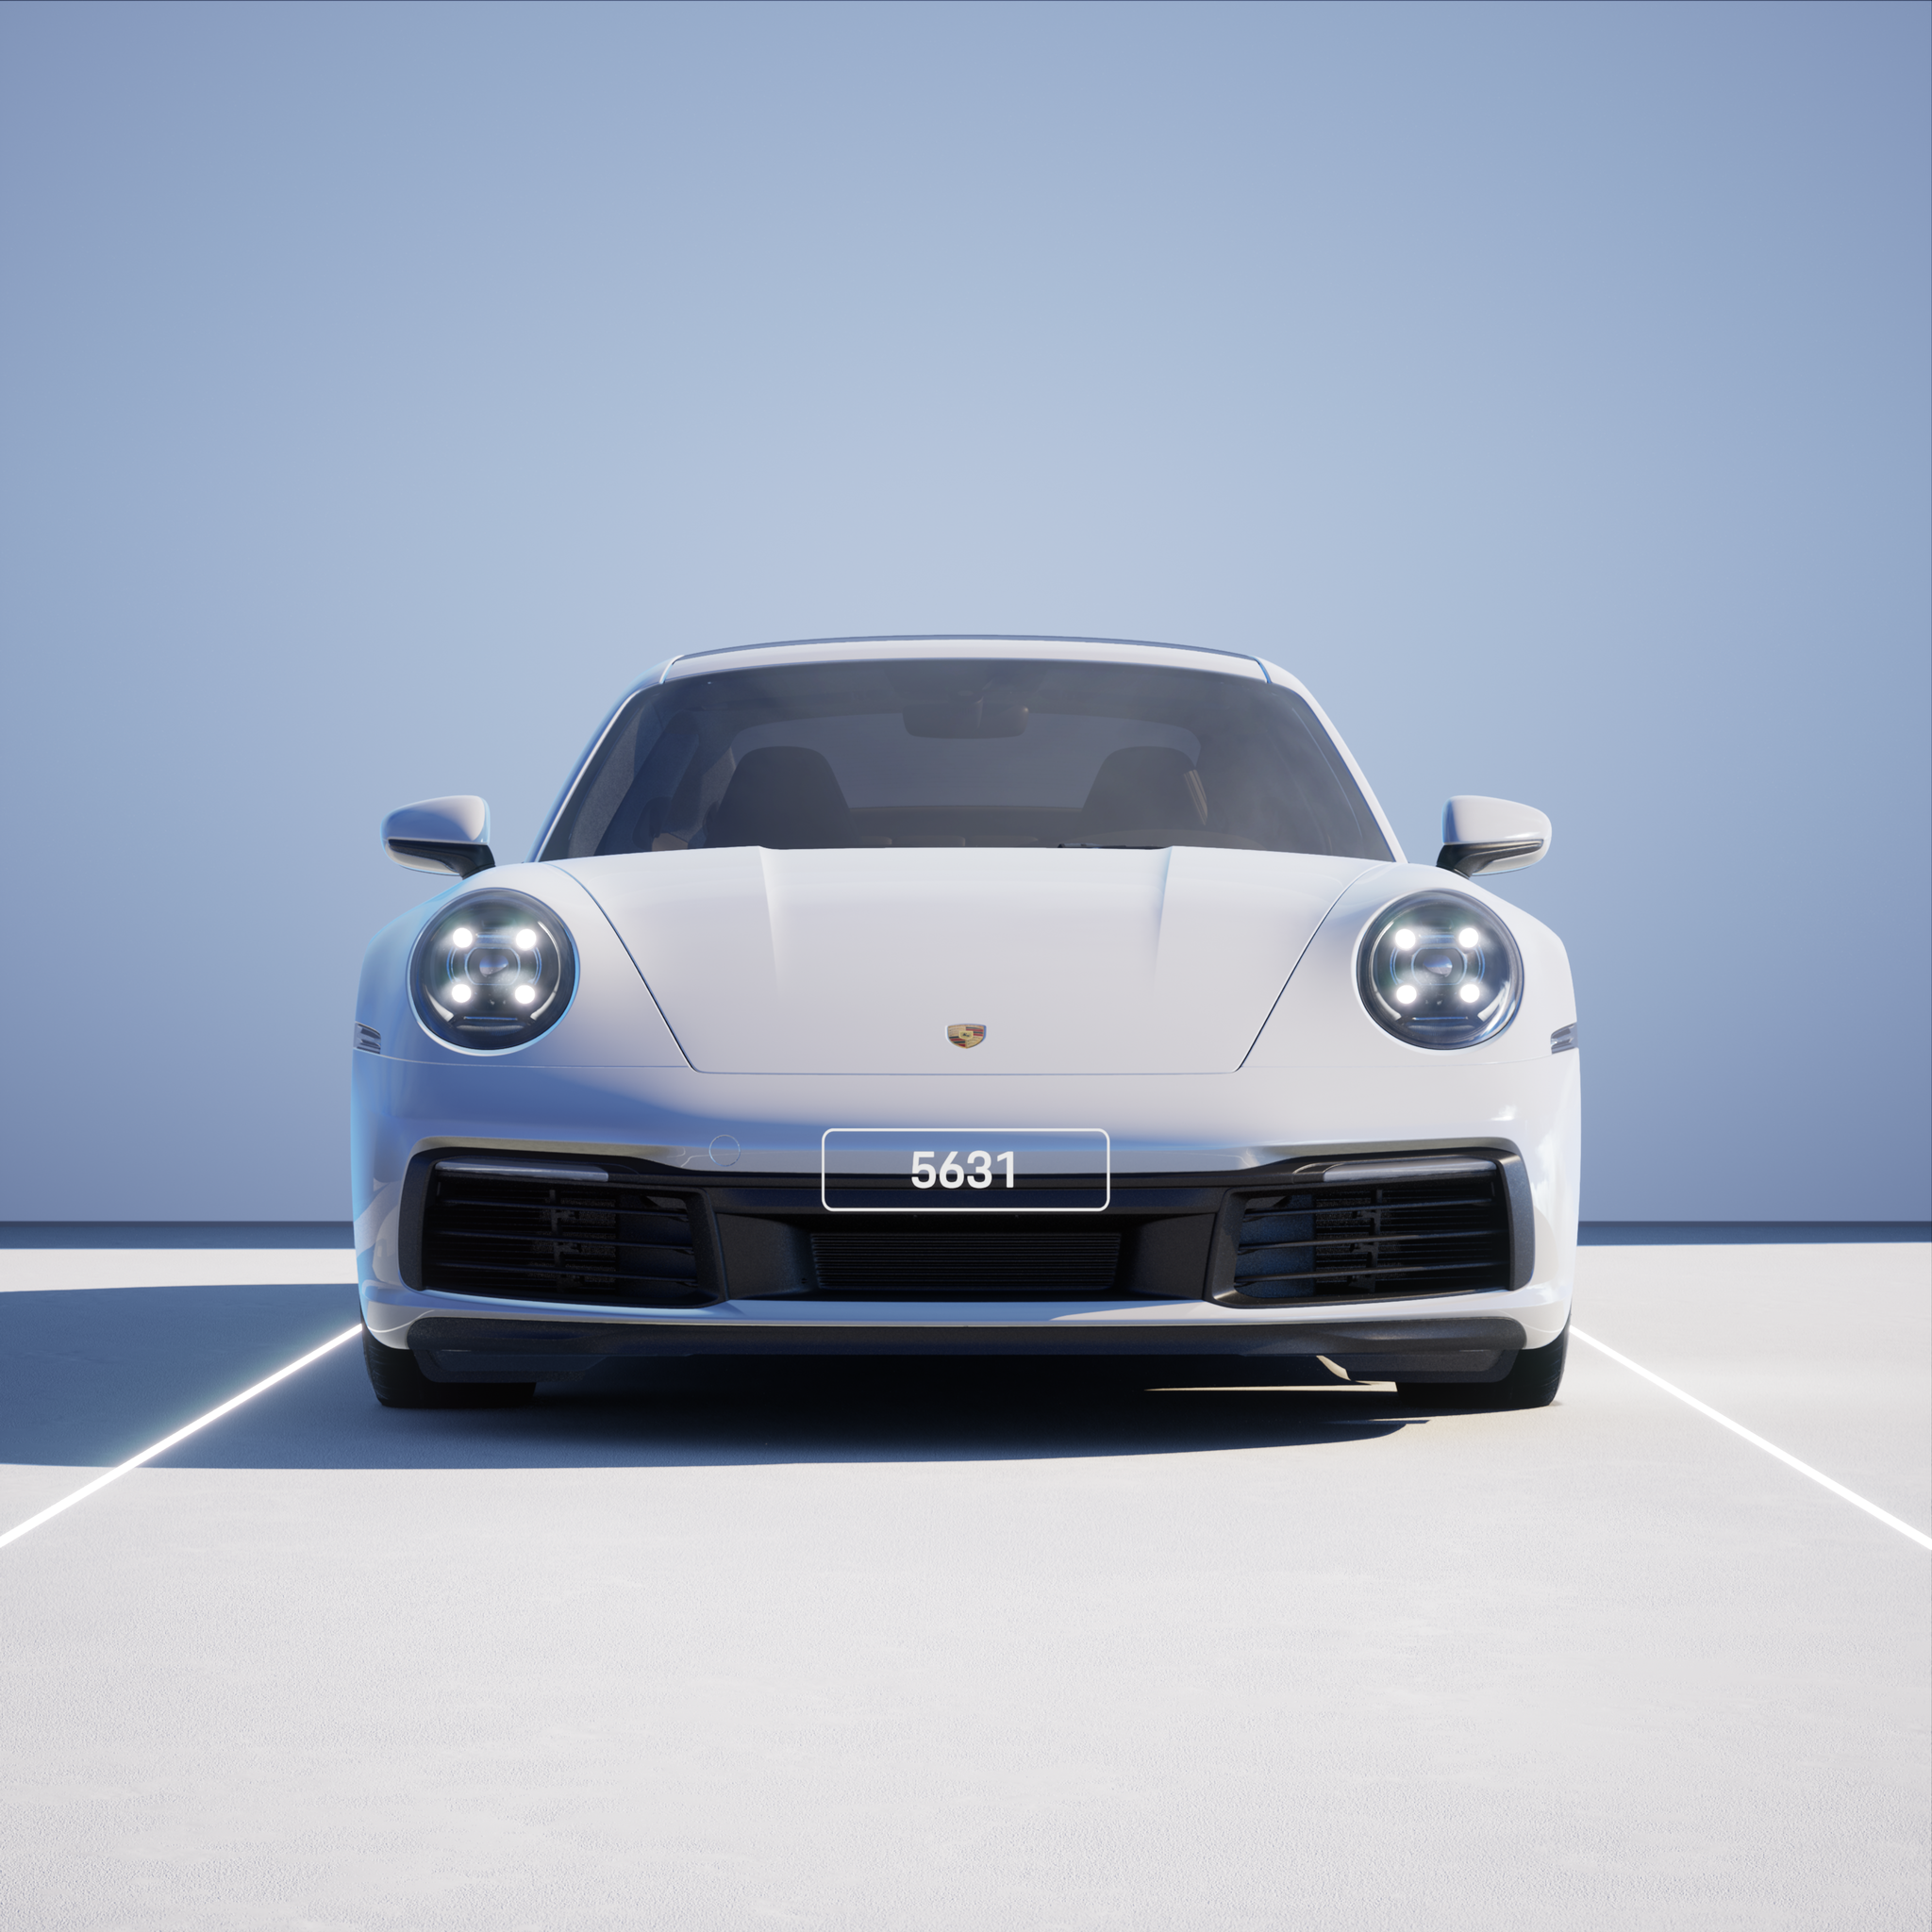 The PORSCHΞ 911 5631 image in phase